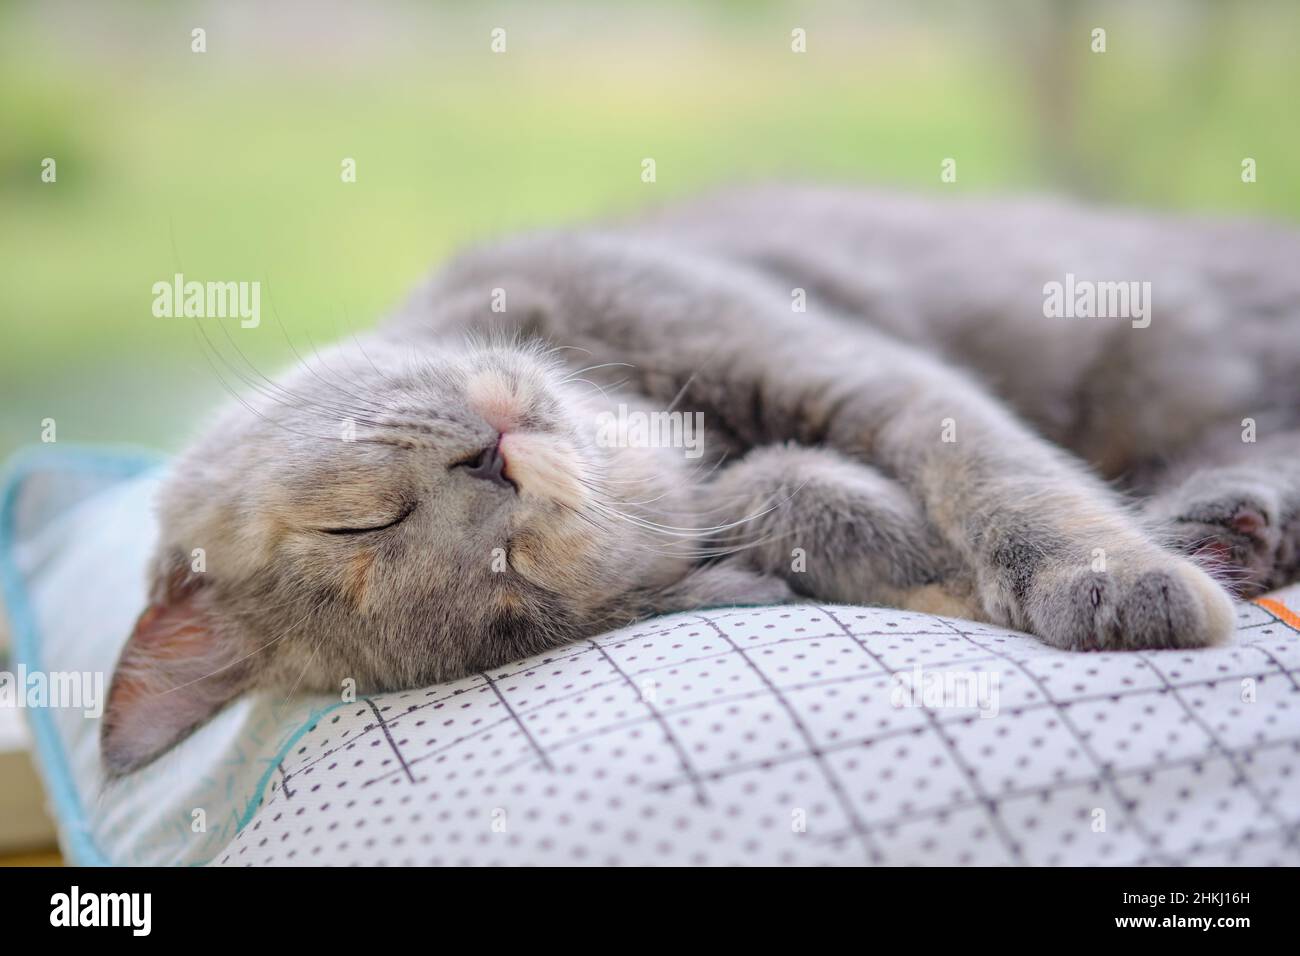 Portrait of a happy gray cat napping on a pillow with a green blurry background Stock Photo